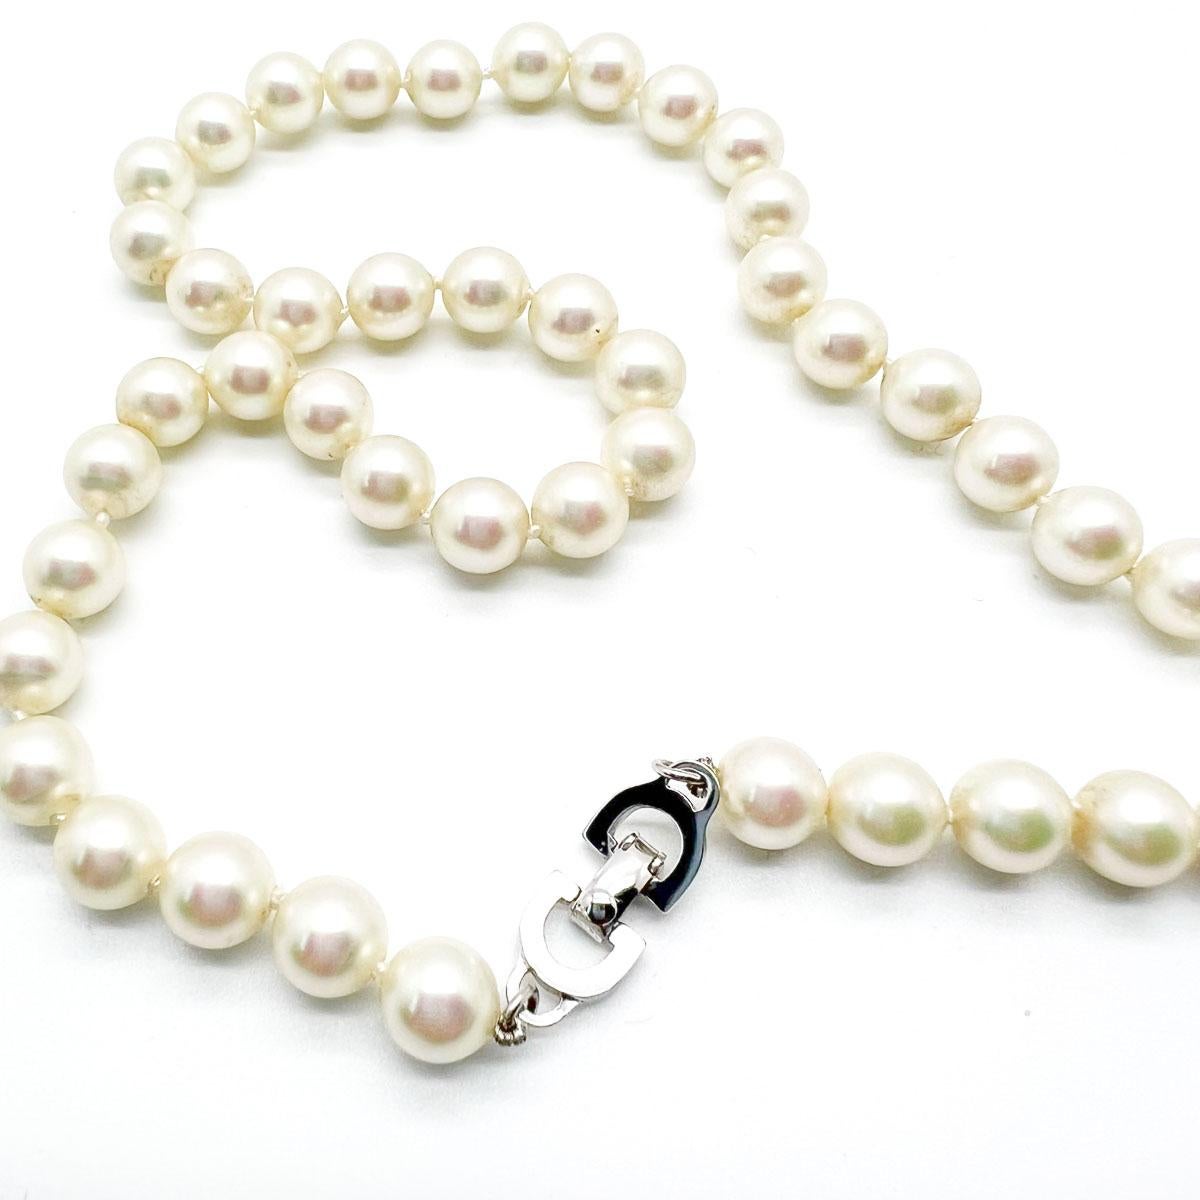 Totally chic, this Vintage Dior Pearl Rope Necklace is epitome of style and sophistication and will transcend the decades with ease.
With archive pieces from her own Dior collection displayed in London's highly acclaimed Dior Designer of Dreams